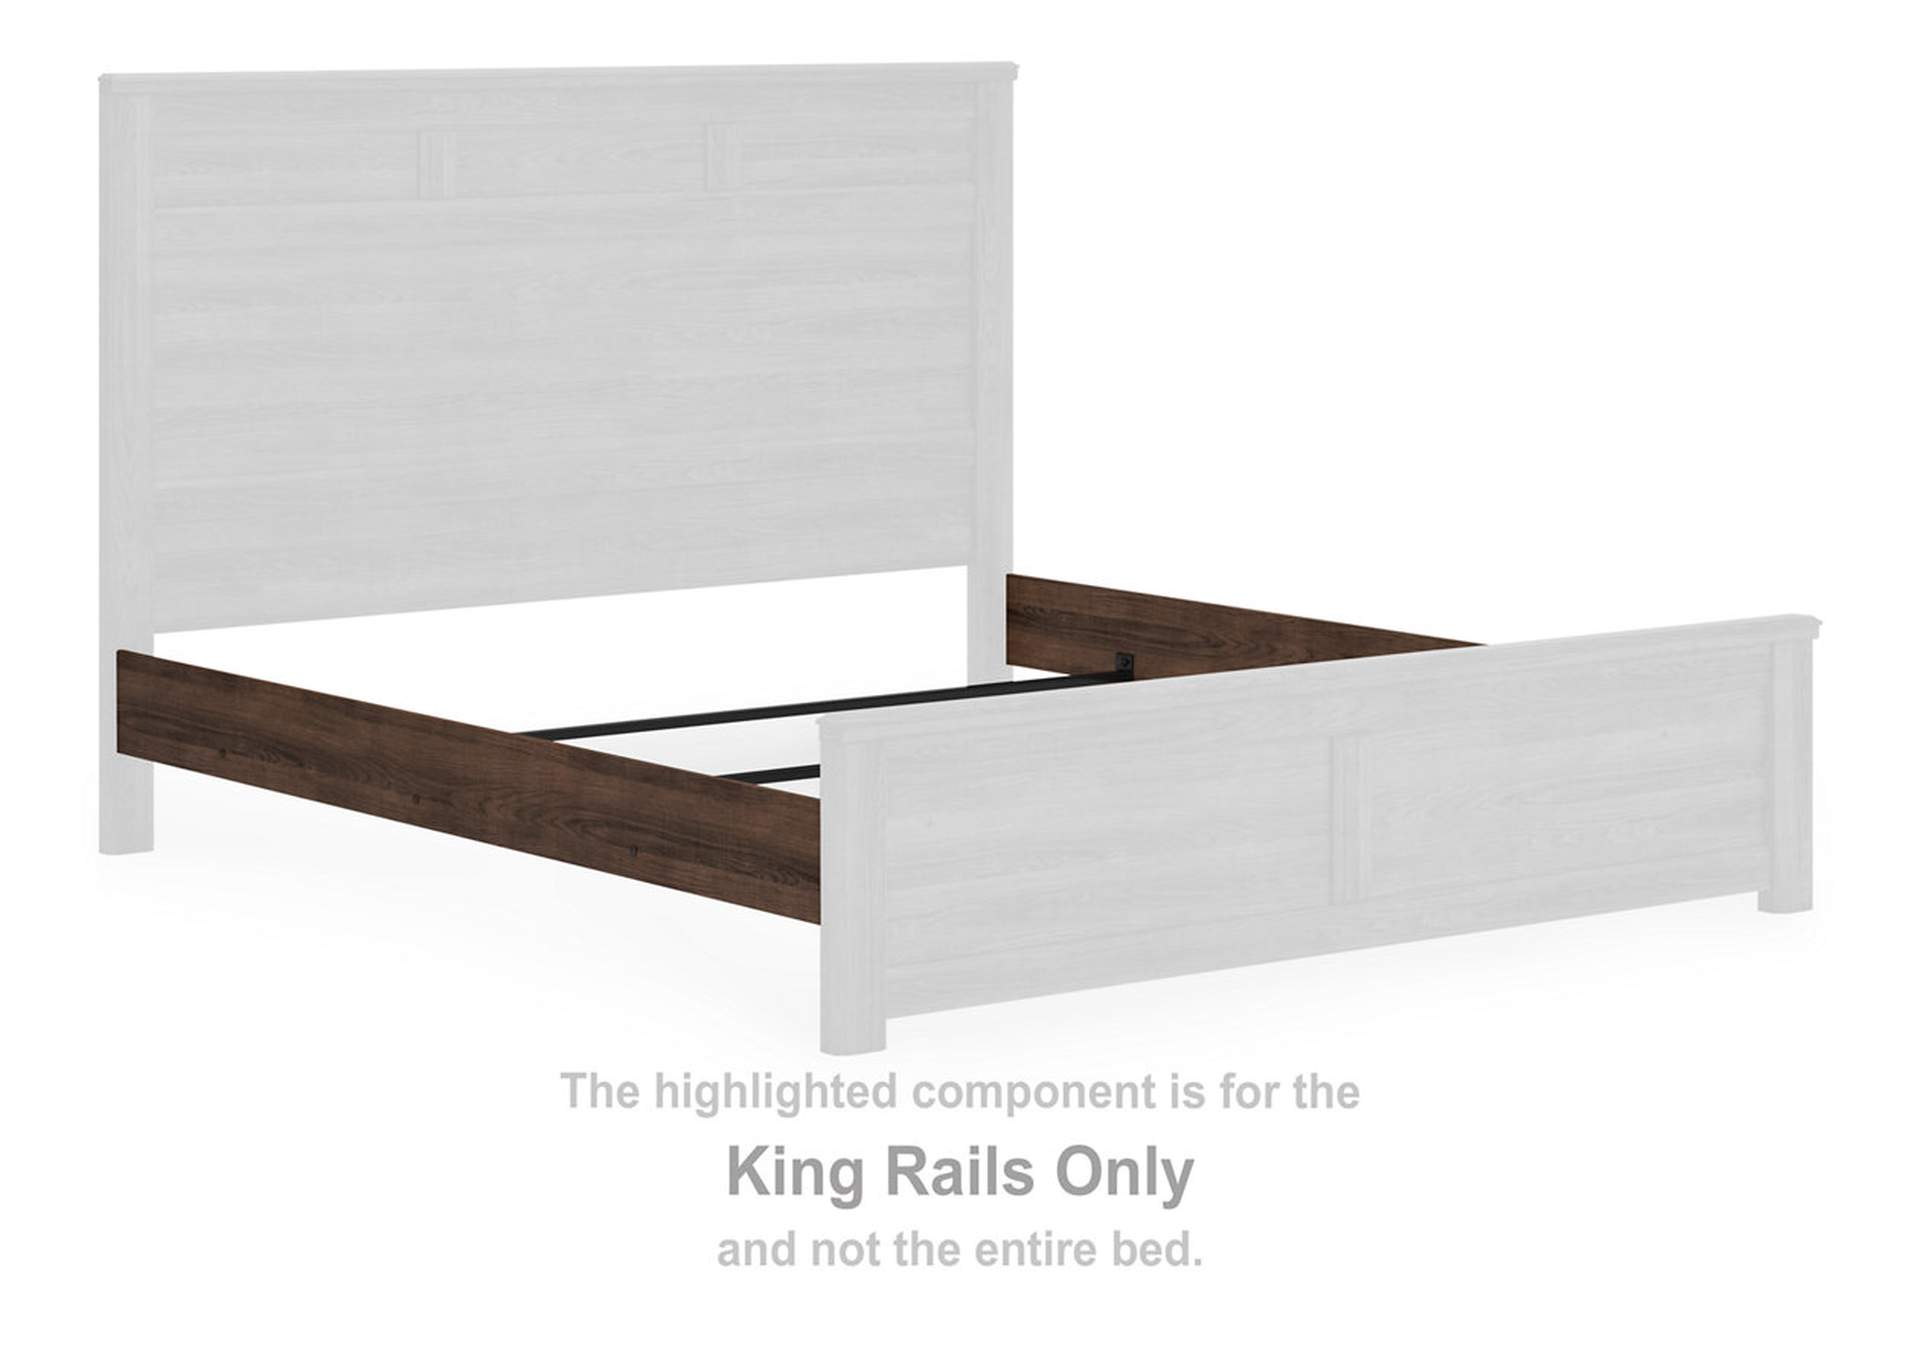 Juararo King Poster Bed,Signature Design By Ashley